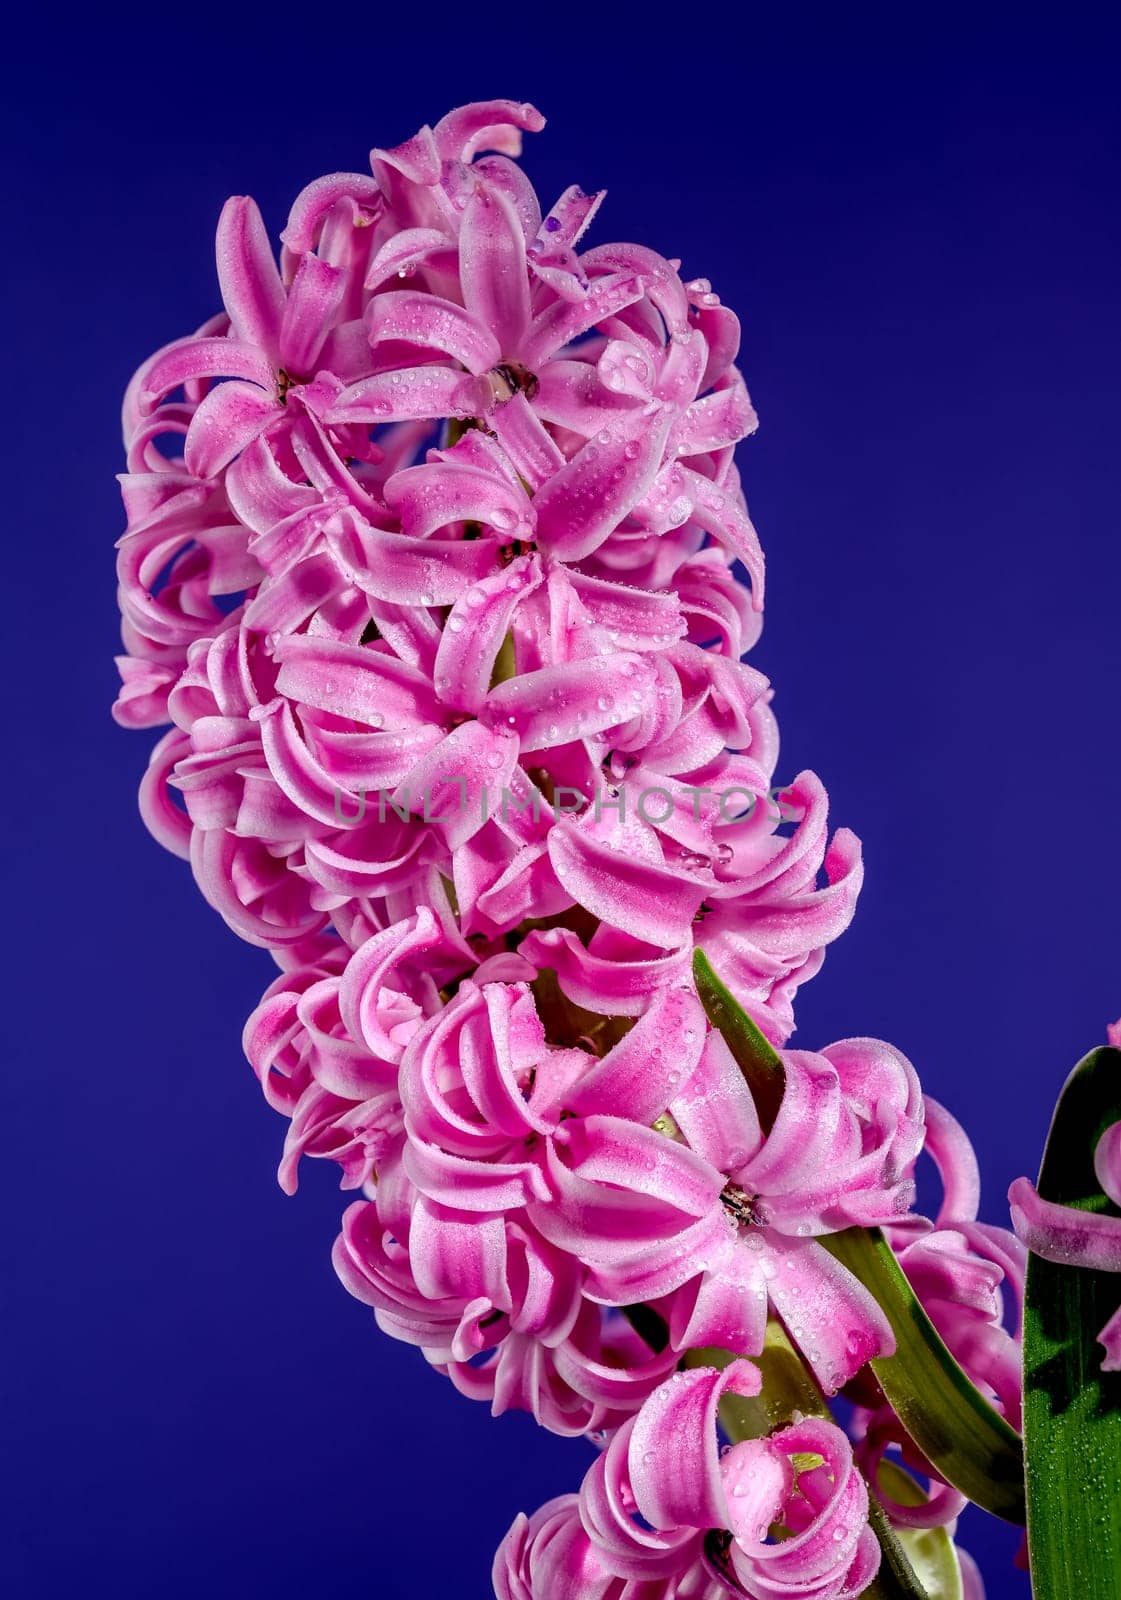 Beautiful blooming pink Hyacinth flower on a blue background. Flower head close-up.